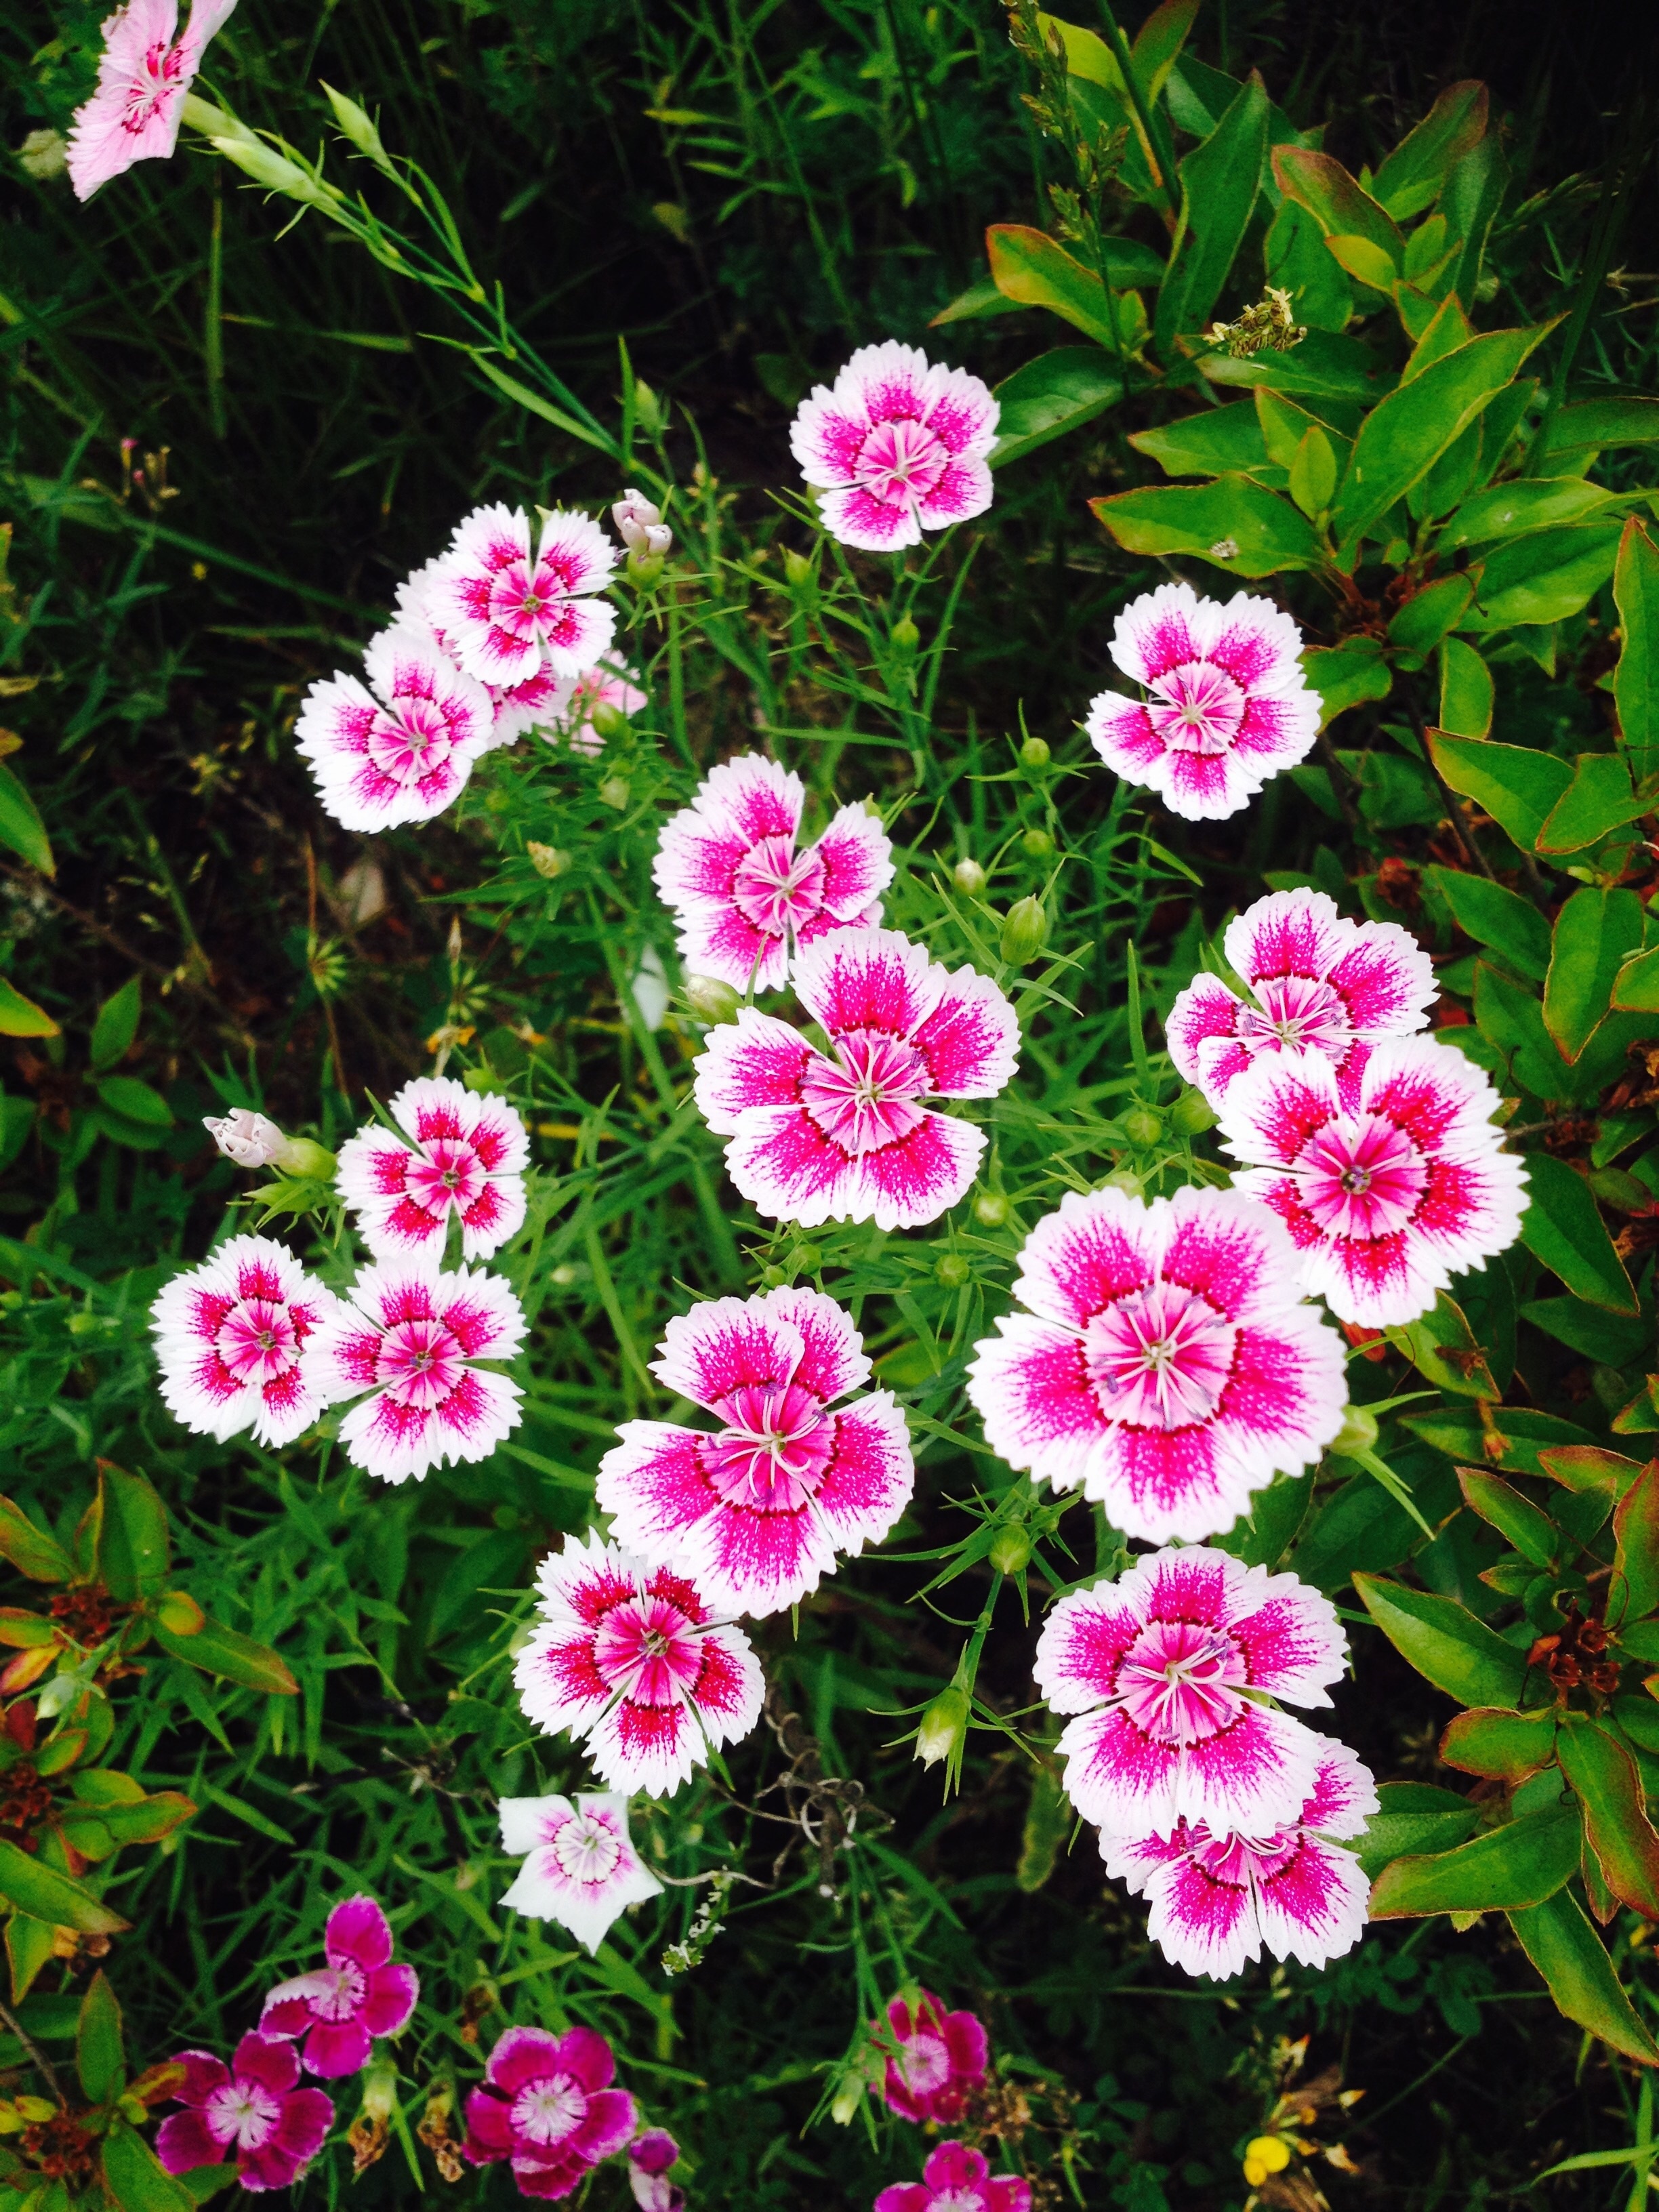 pink and white 5 petaled flower